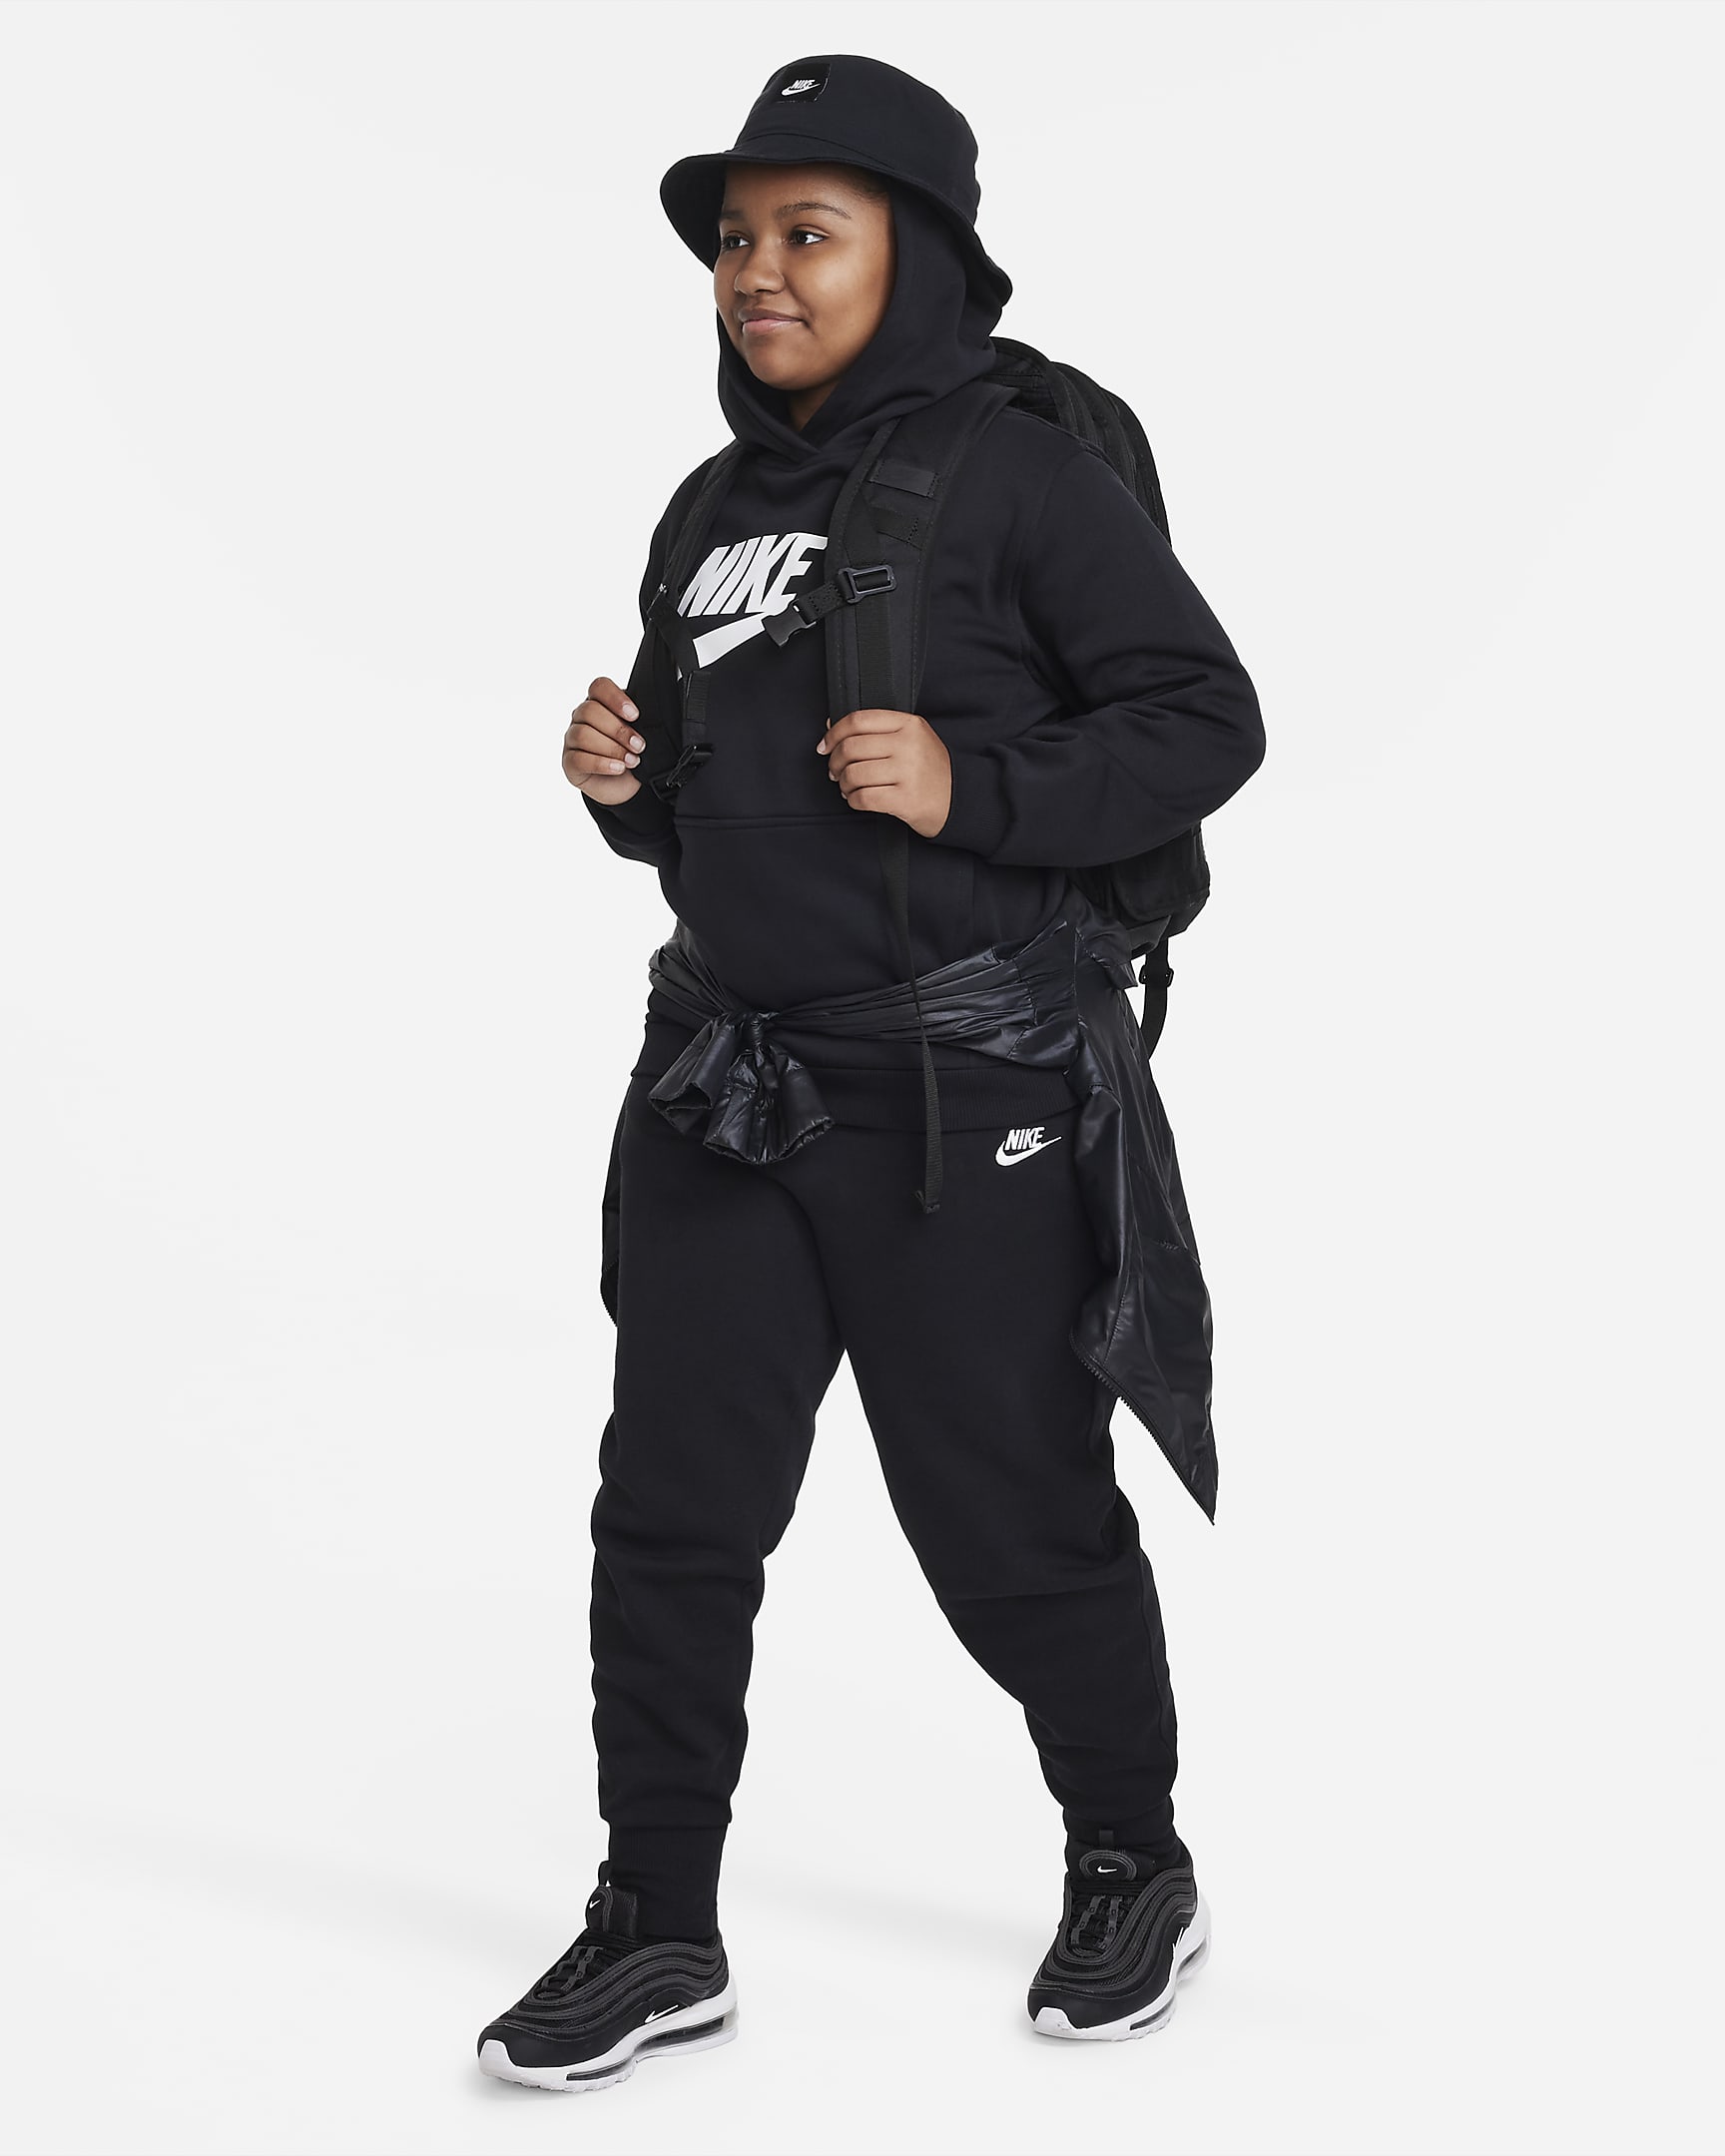 Nike Sportswear Club Fleece Older Kids' (Girls') High-Waisted Fitted Trousers (Extended Size) - Black/Black/White